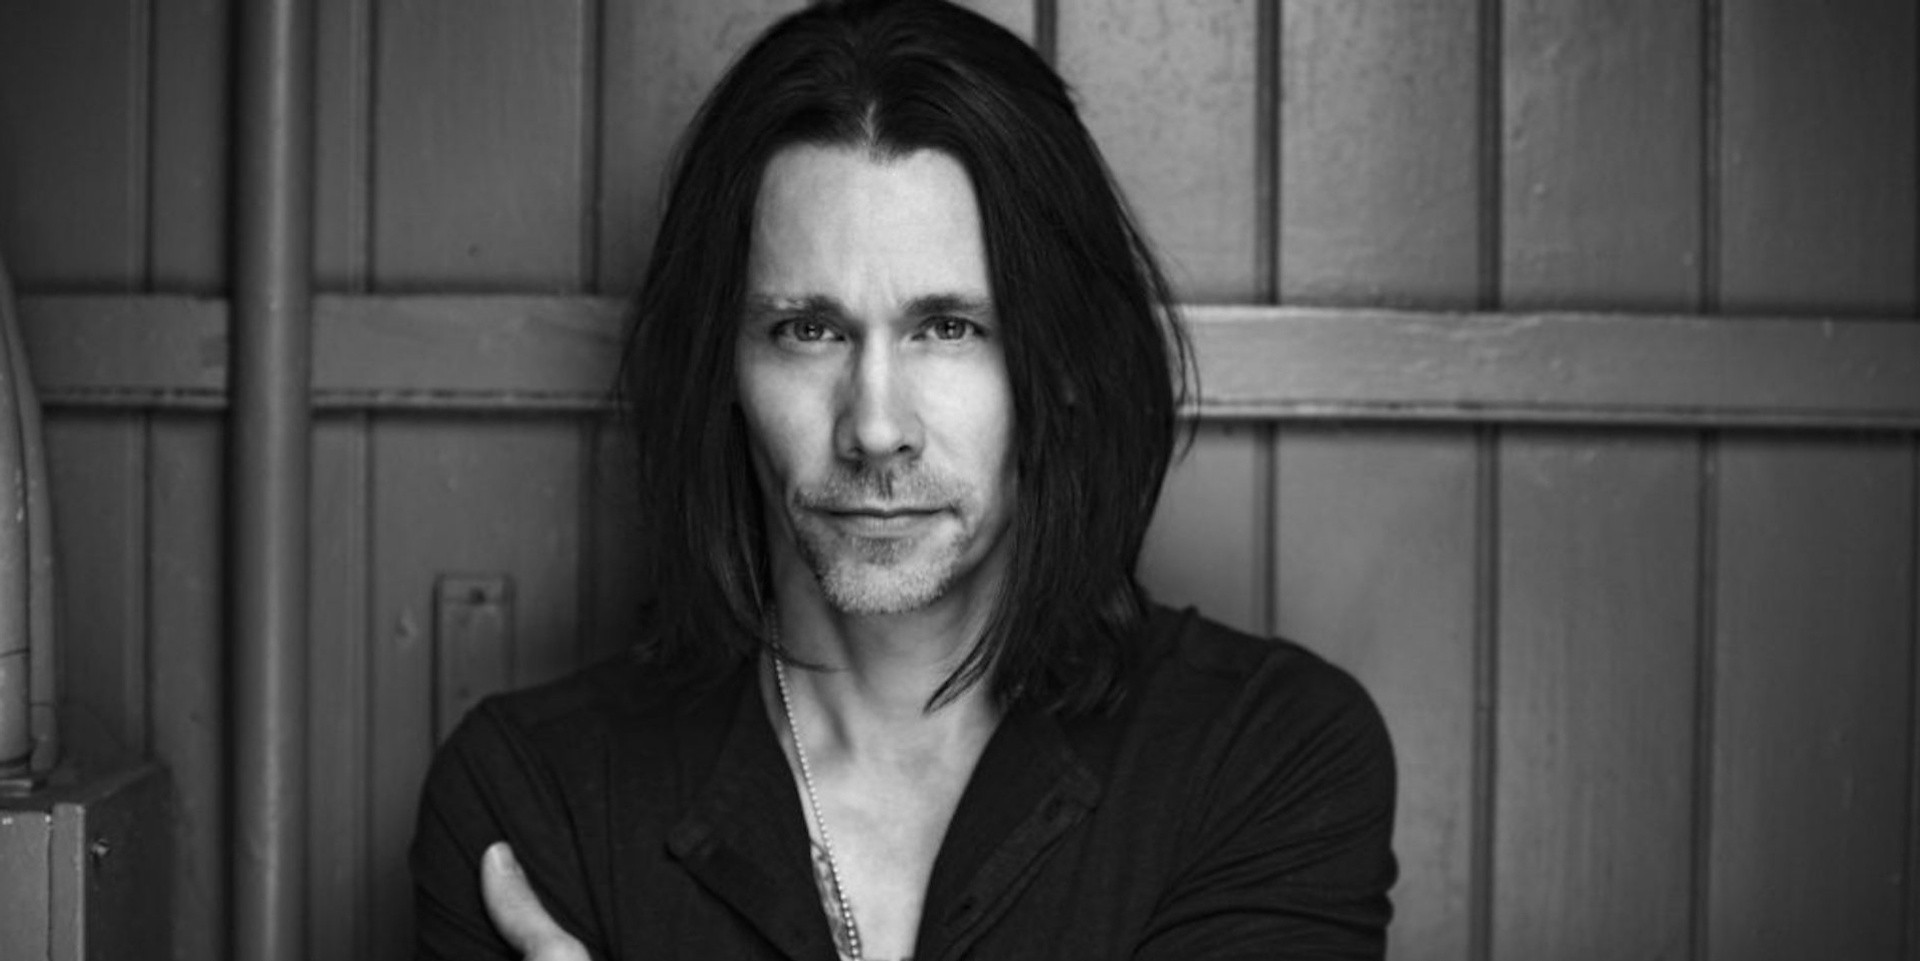 7 things you didn't know about Myles Kennedy